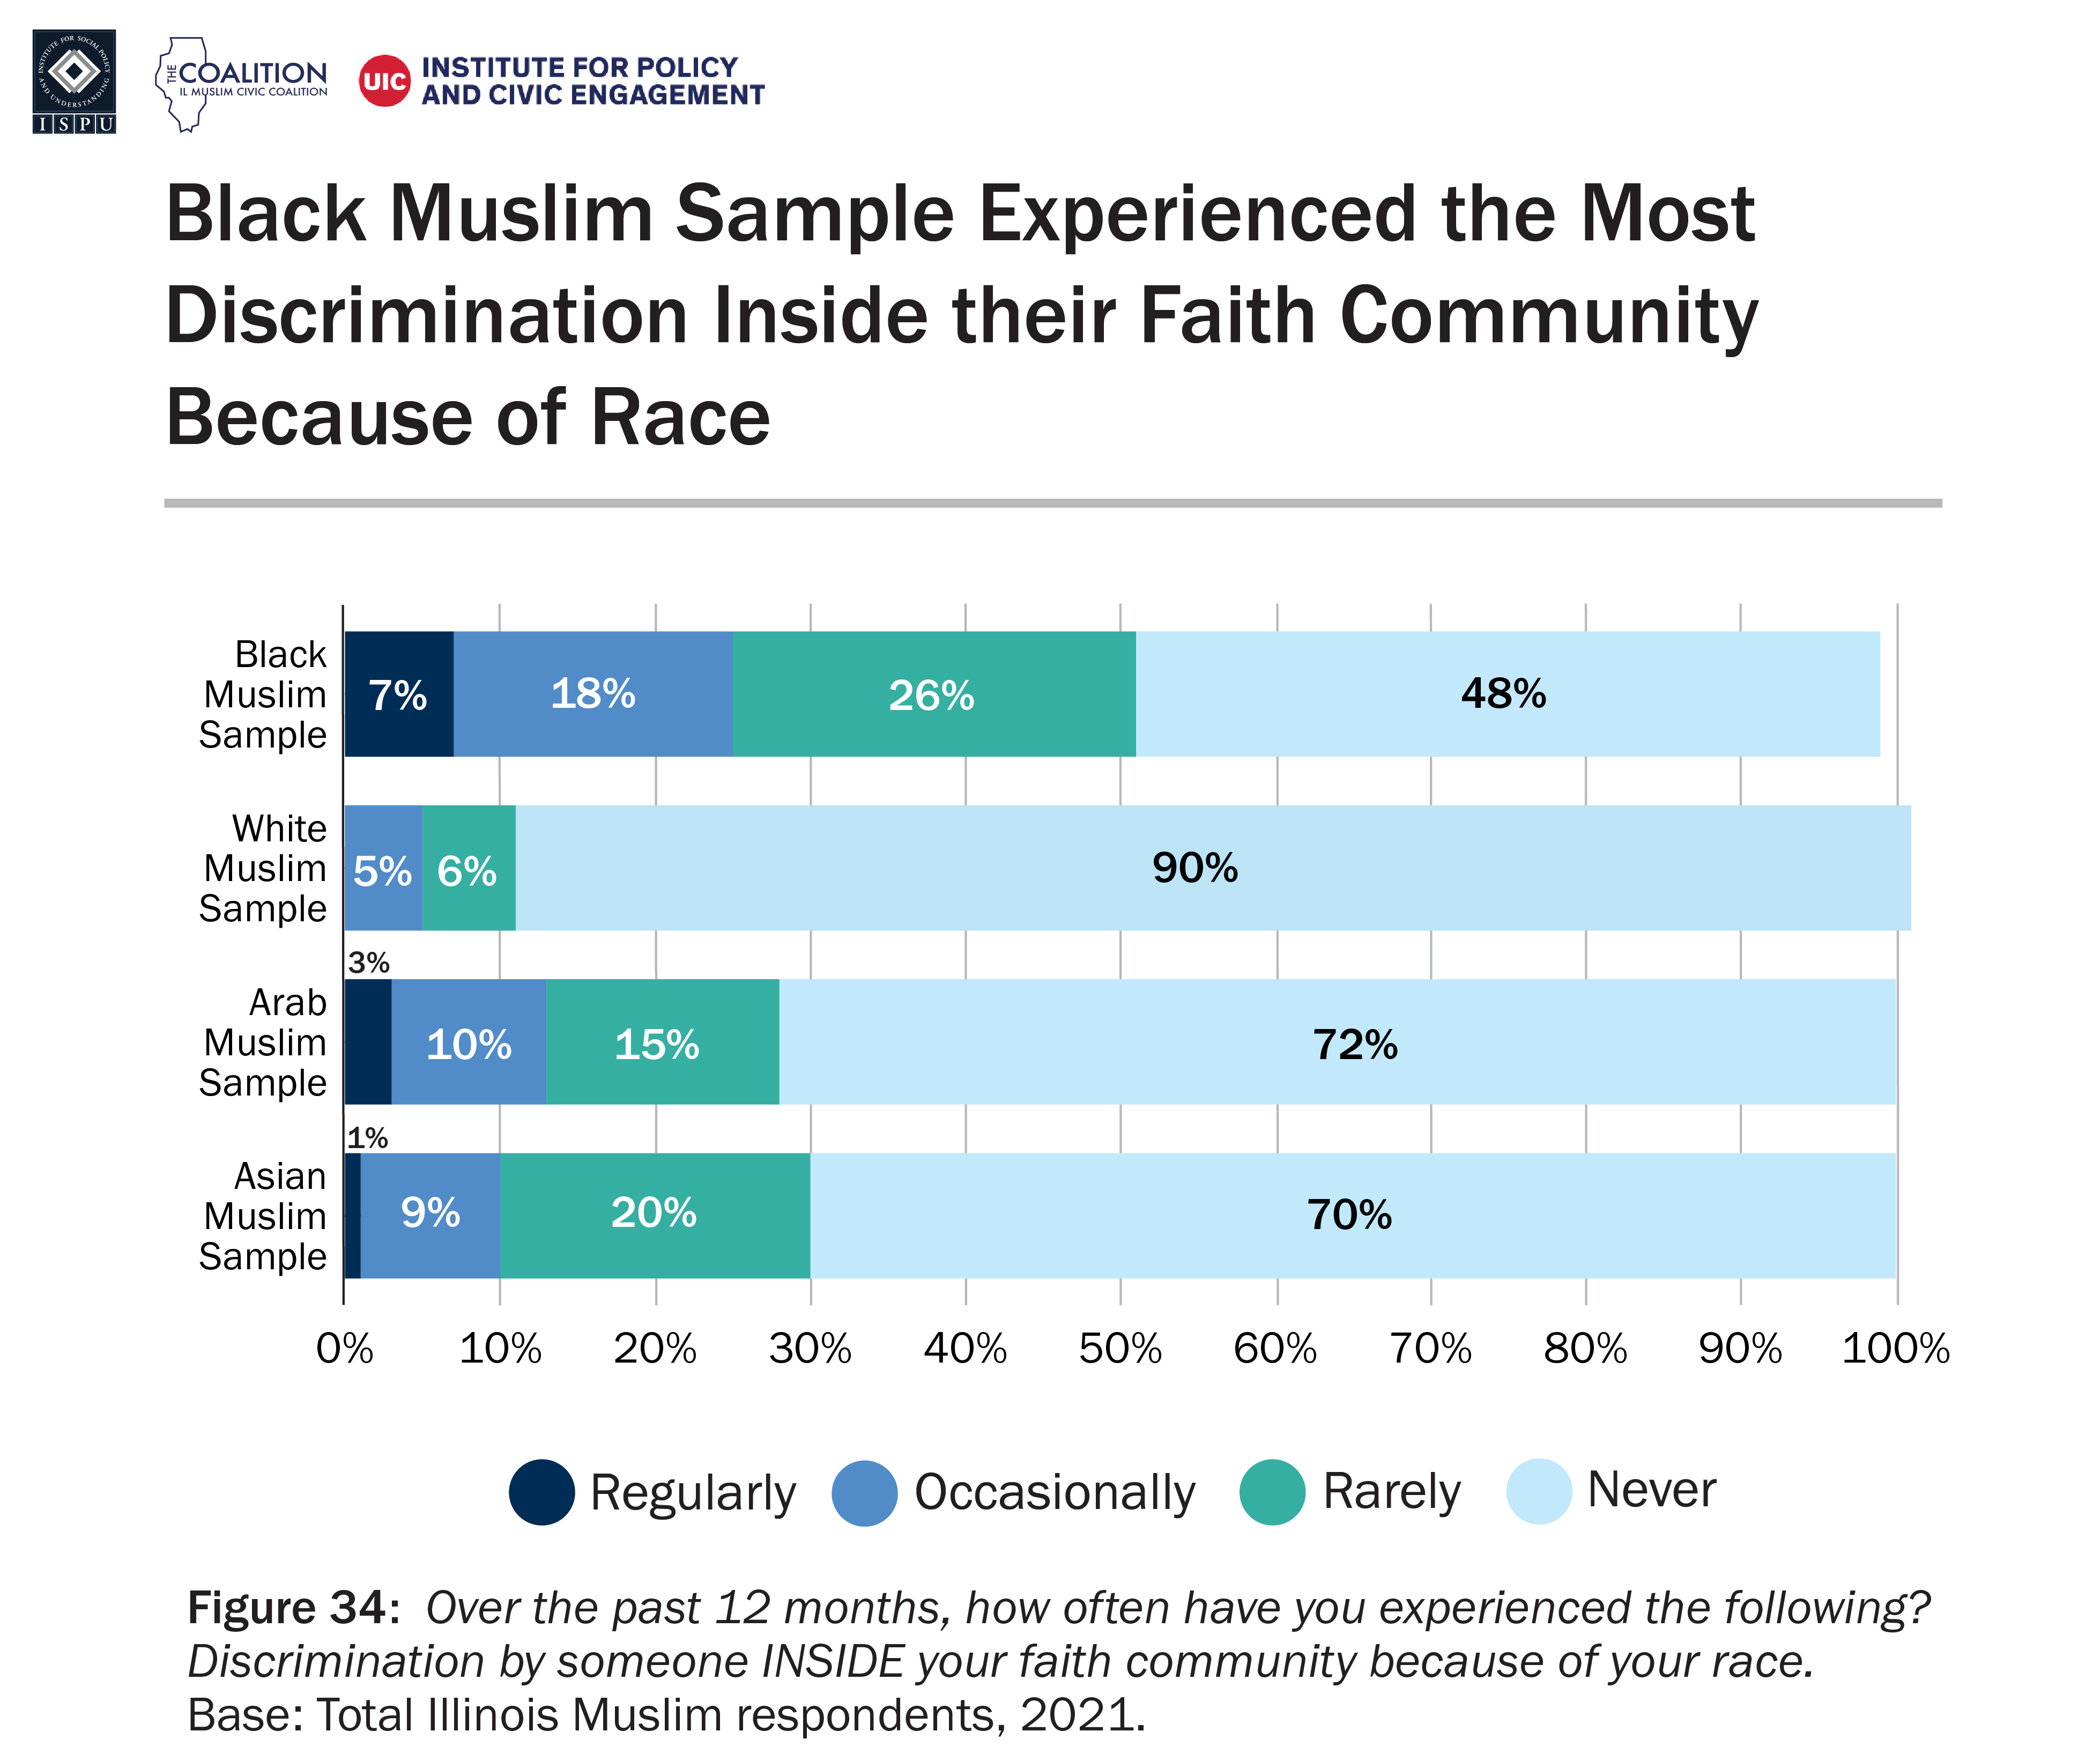 A bar graph showing frequency of experiencing racial discrimination by someone inside faith community by race among Illinois Muslim sample